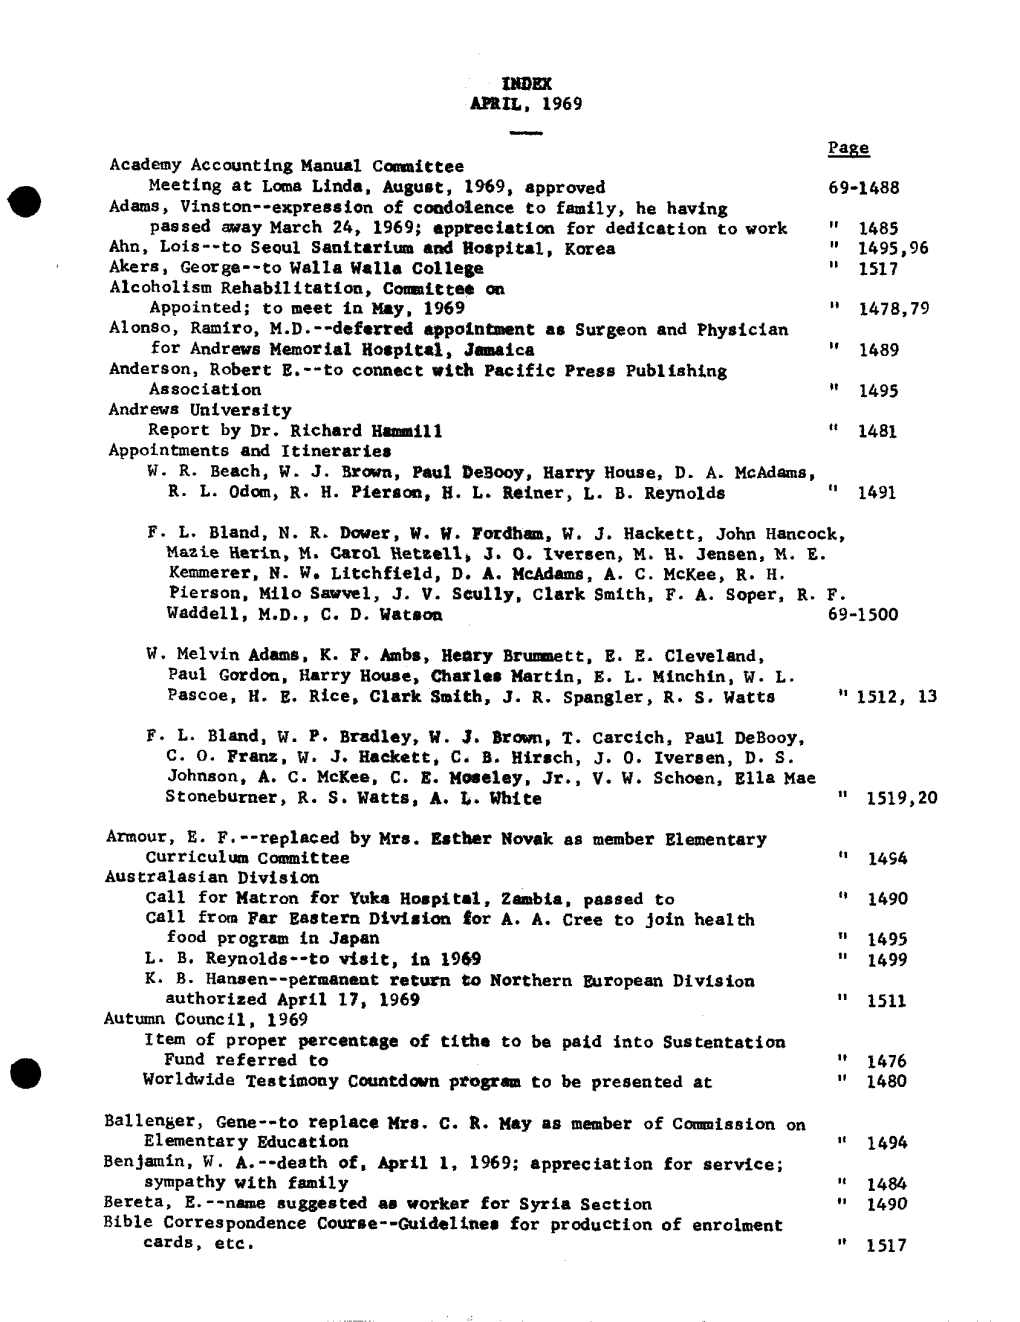 APRIL, 1969 Academy Accounting Manual Committee Meeting At